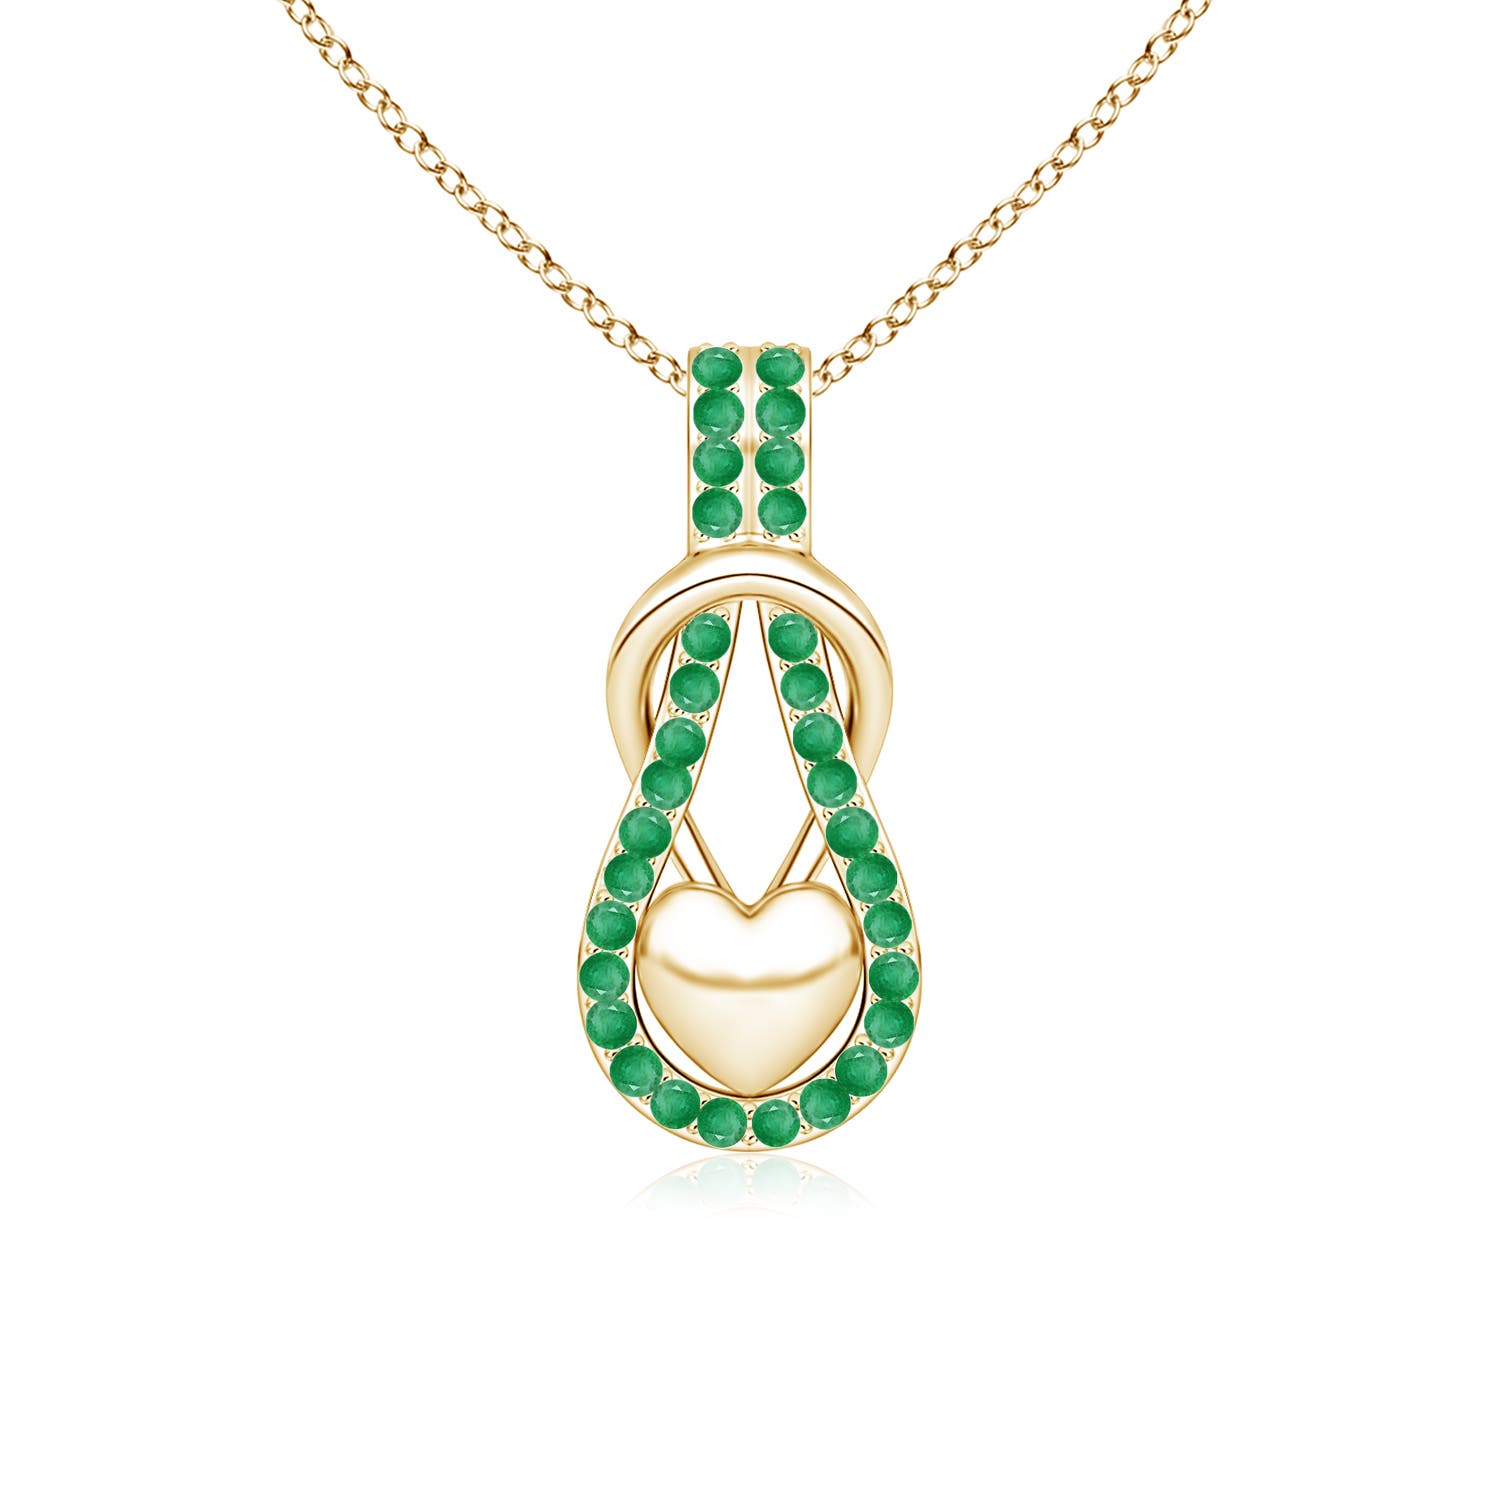 A - Emerald / 0.48 CT / 14 KT Yellow Gold